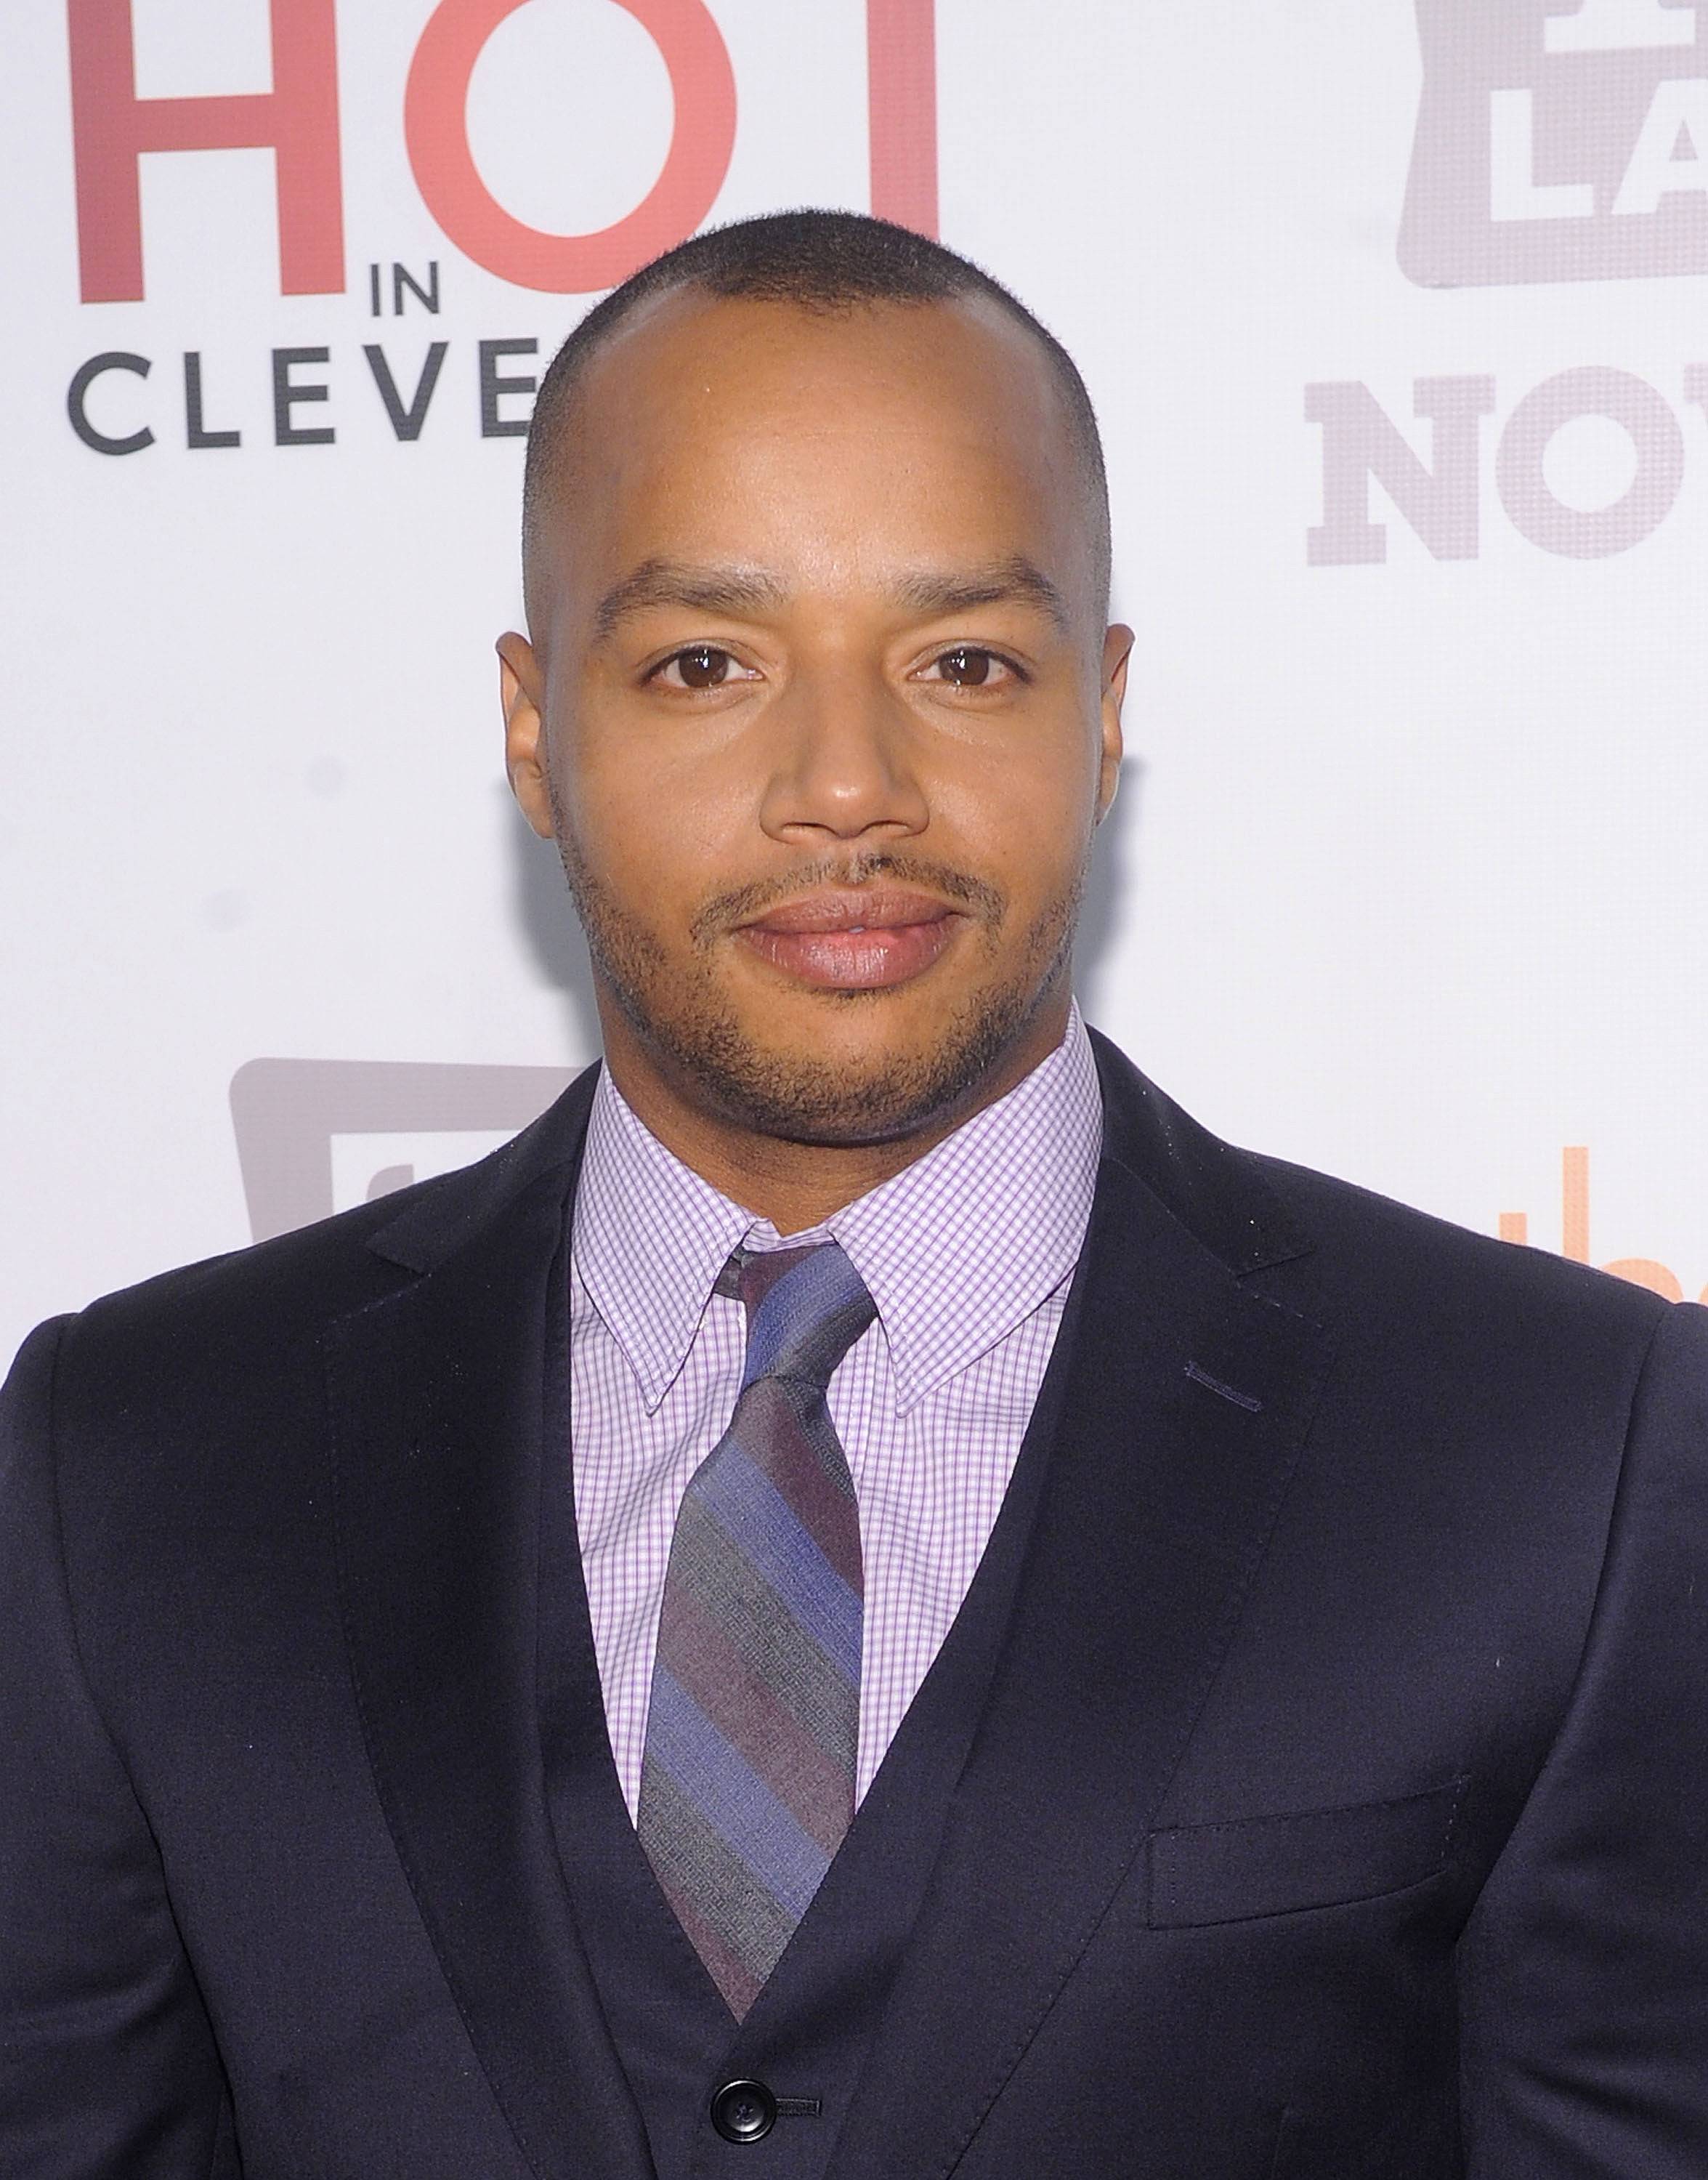 Donald Faison - You probably missed Faison's tiny role as &quot;student&quot; in Juice.&nbsp; He's currently starring in the new sitcom The Exes and has continuously graced the big and small screen in the 20 years since Juice. The divorced dad of three has starred in Sugar Hill, Waiting to Exhale, Clueless, Scrubs and Skyline.(Photo: Jamie McCarthy/Getty Images)